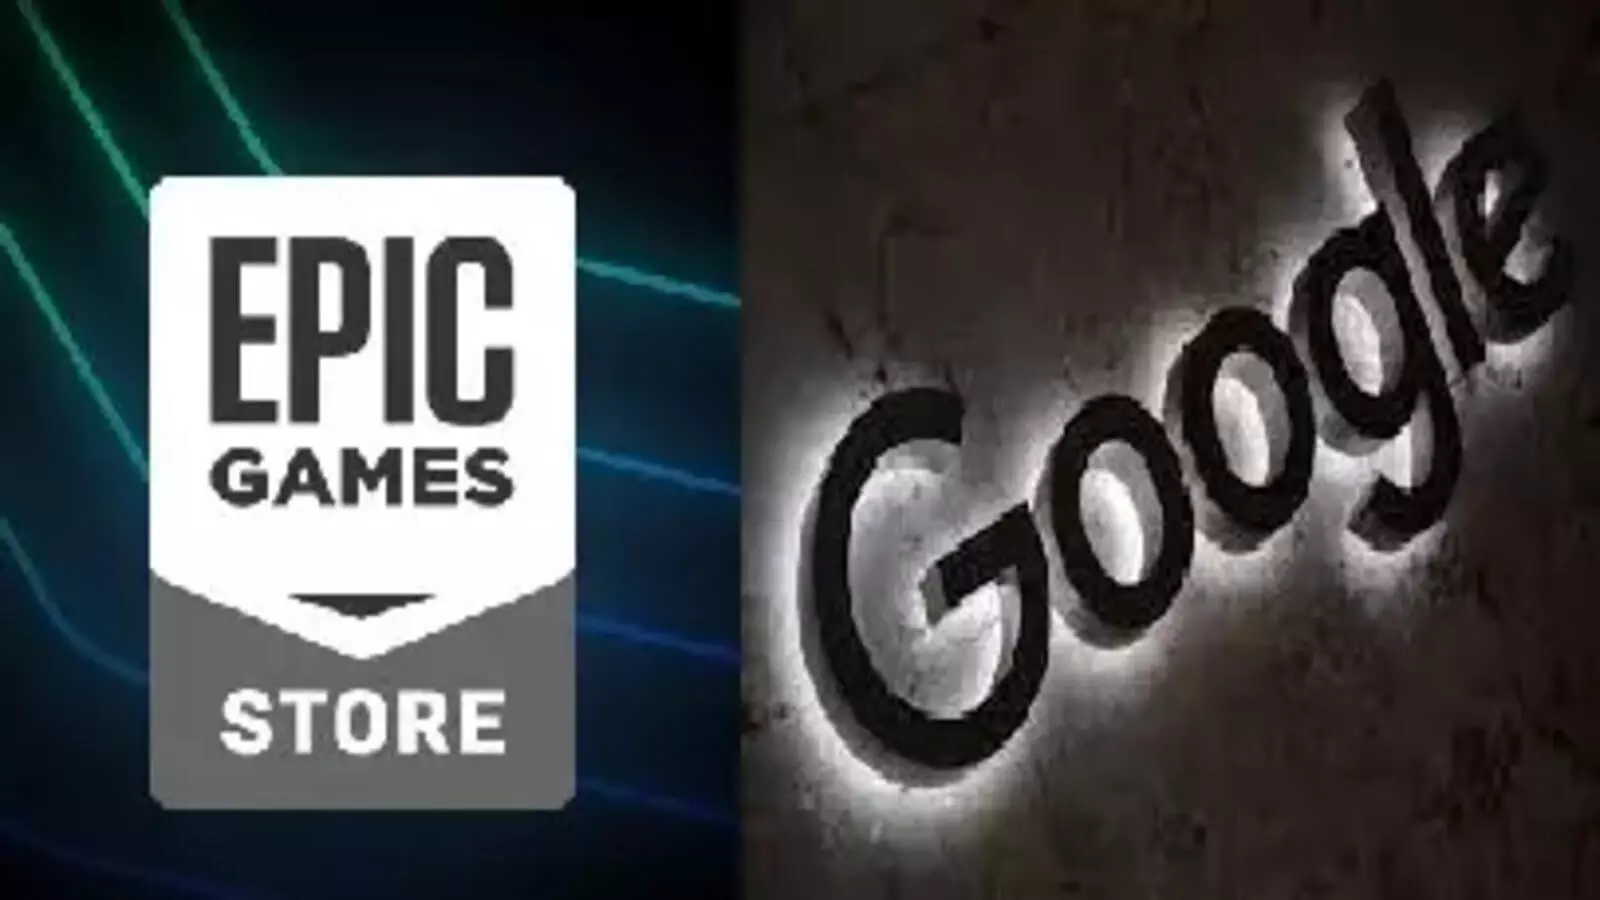 Judge Orders Google to Assess Costs of Epic Games Play Store Demands